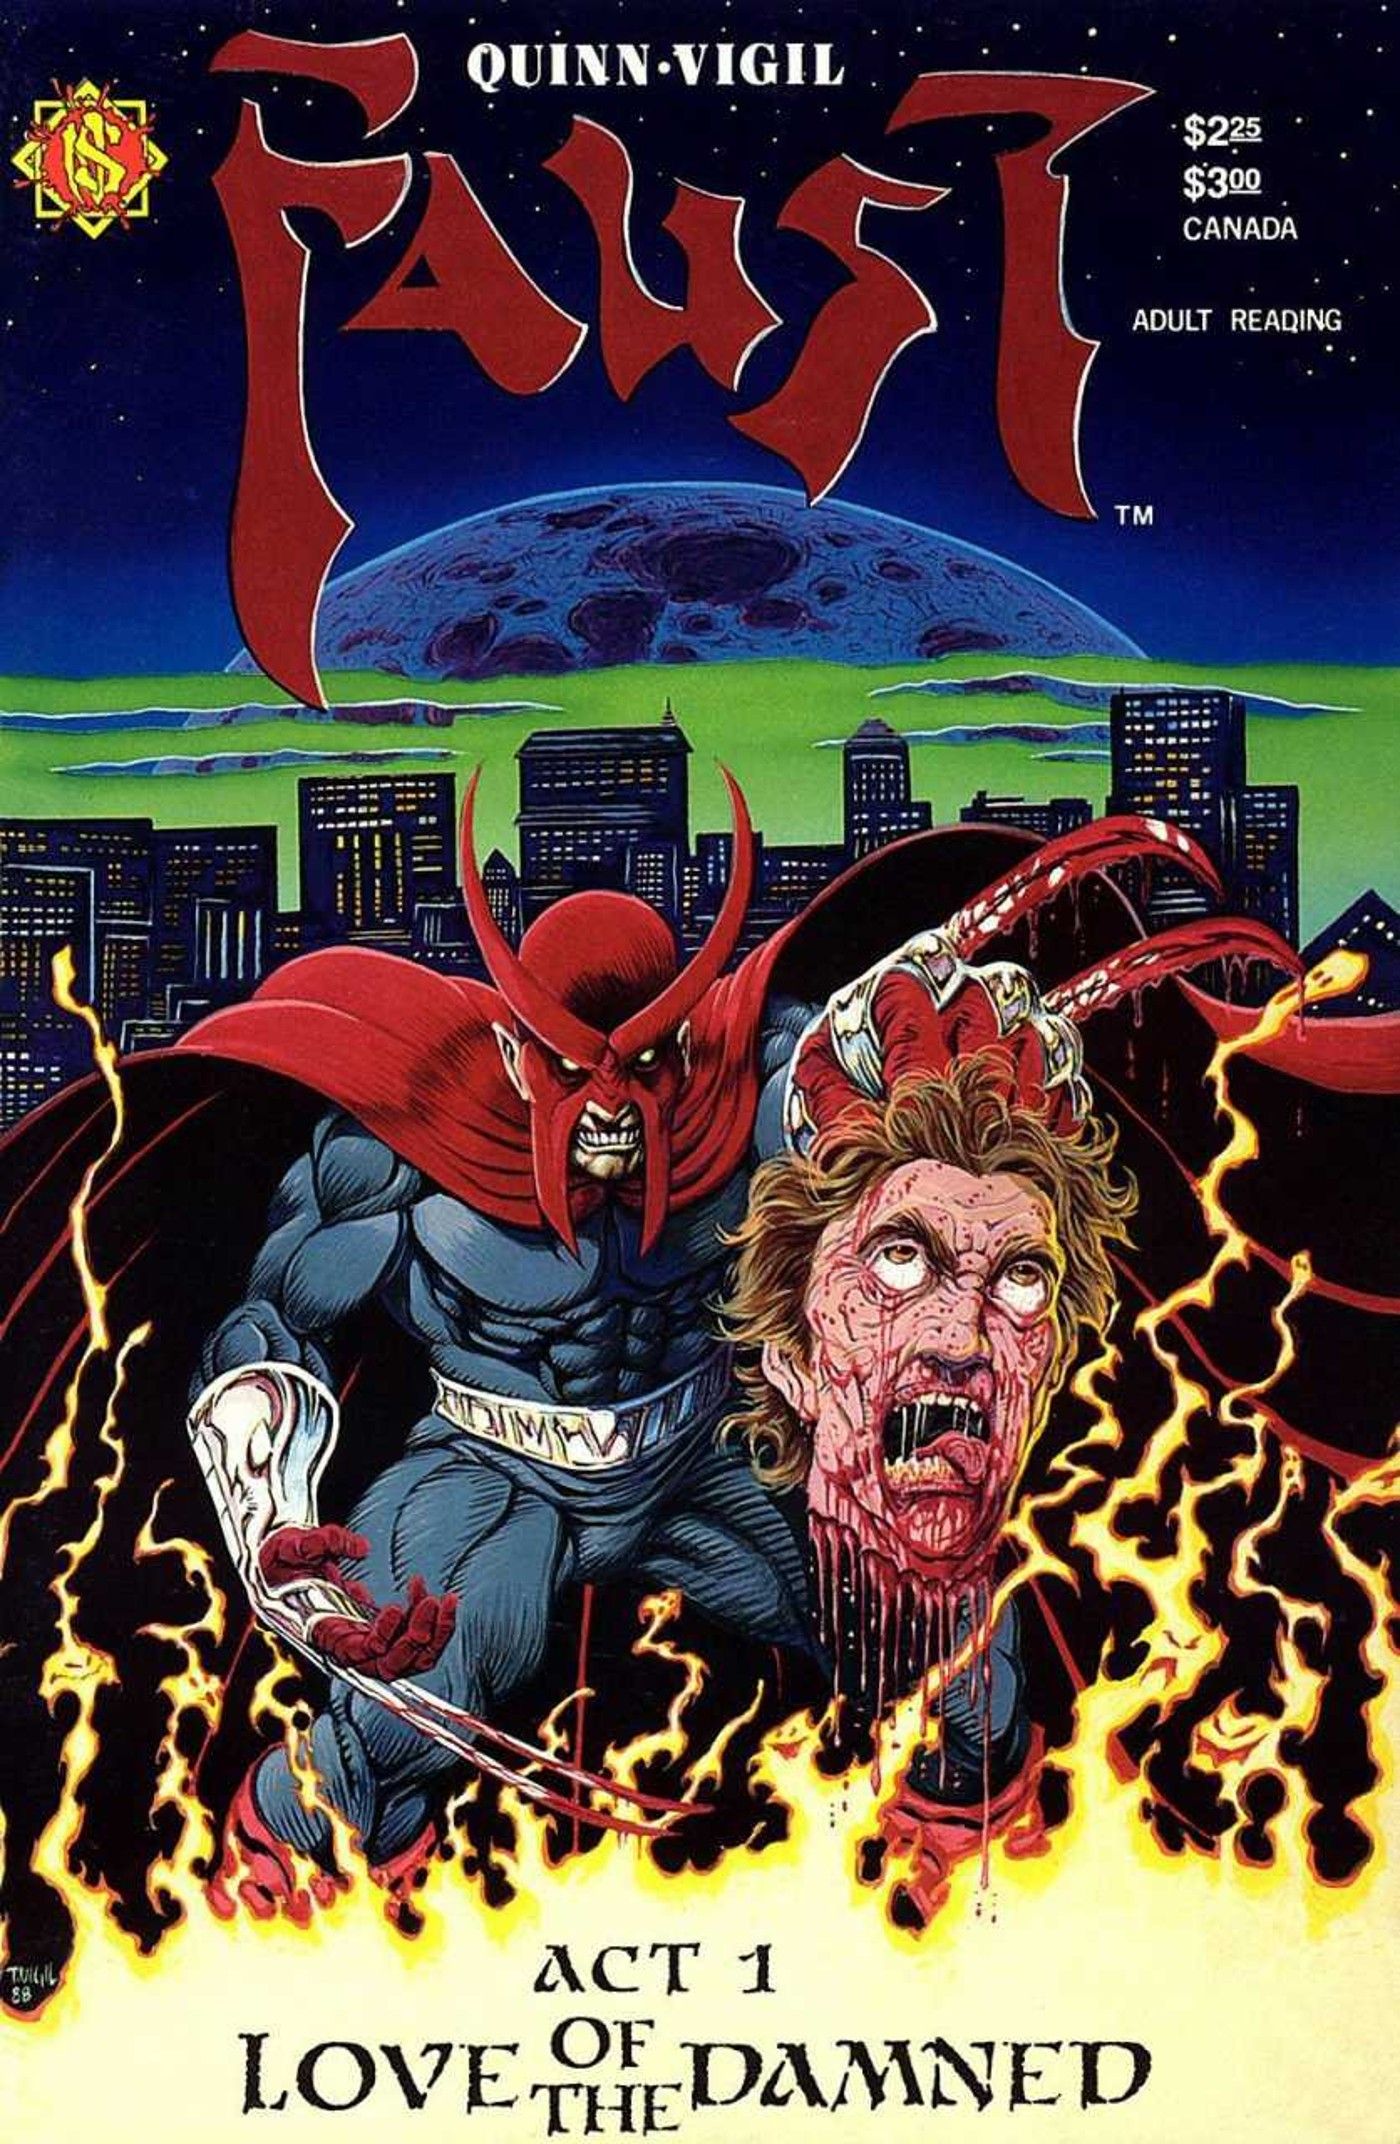 Image of a Faust cover, showing the hero holding a severed head.